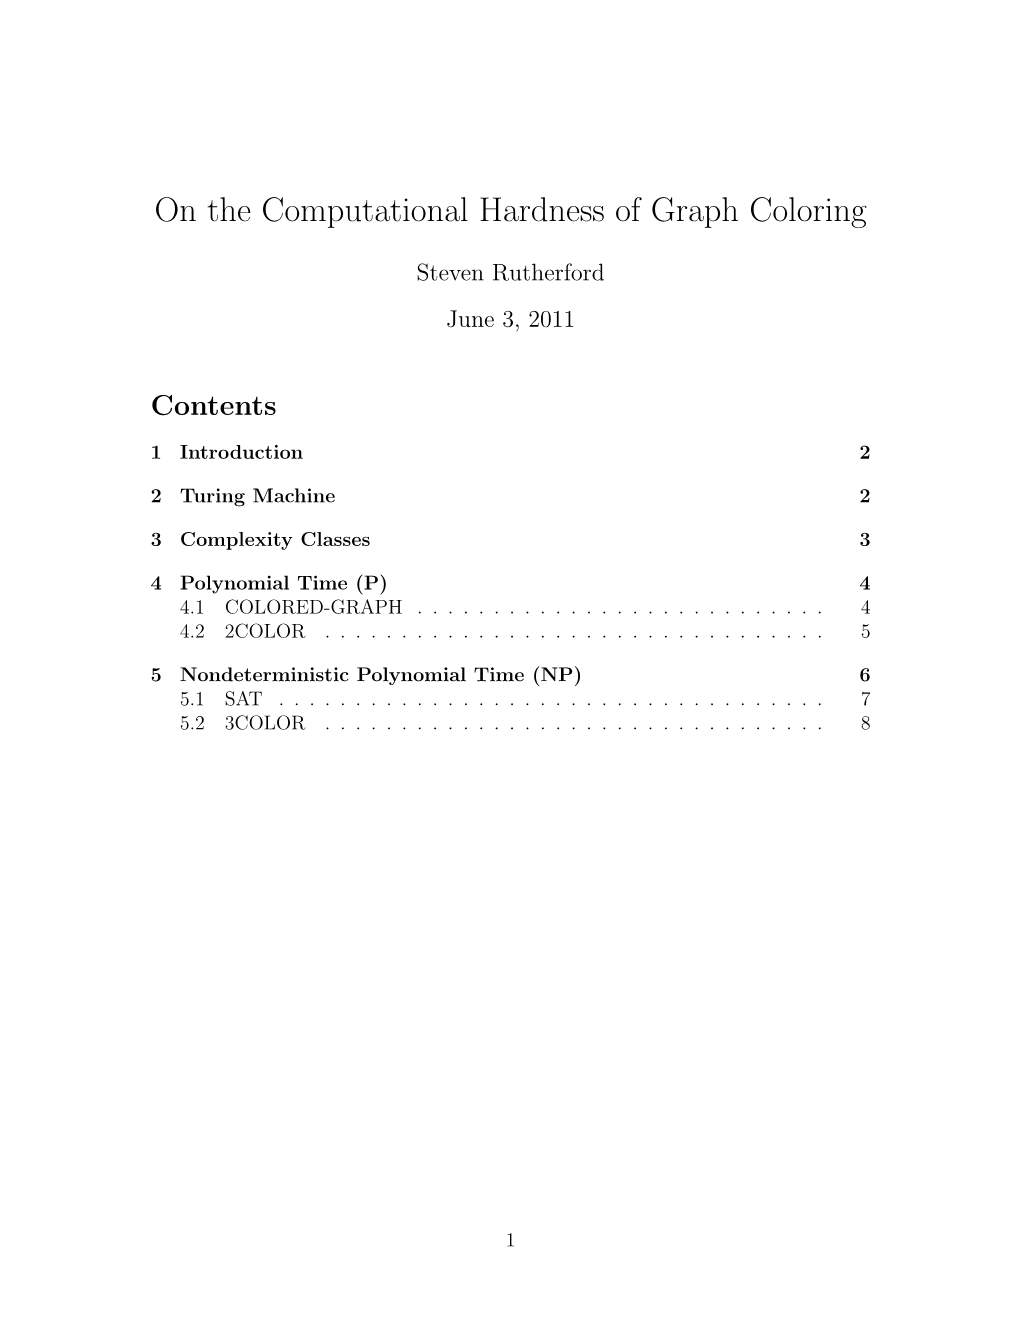 On the Computational Hardness of Graph Coloring